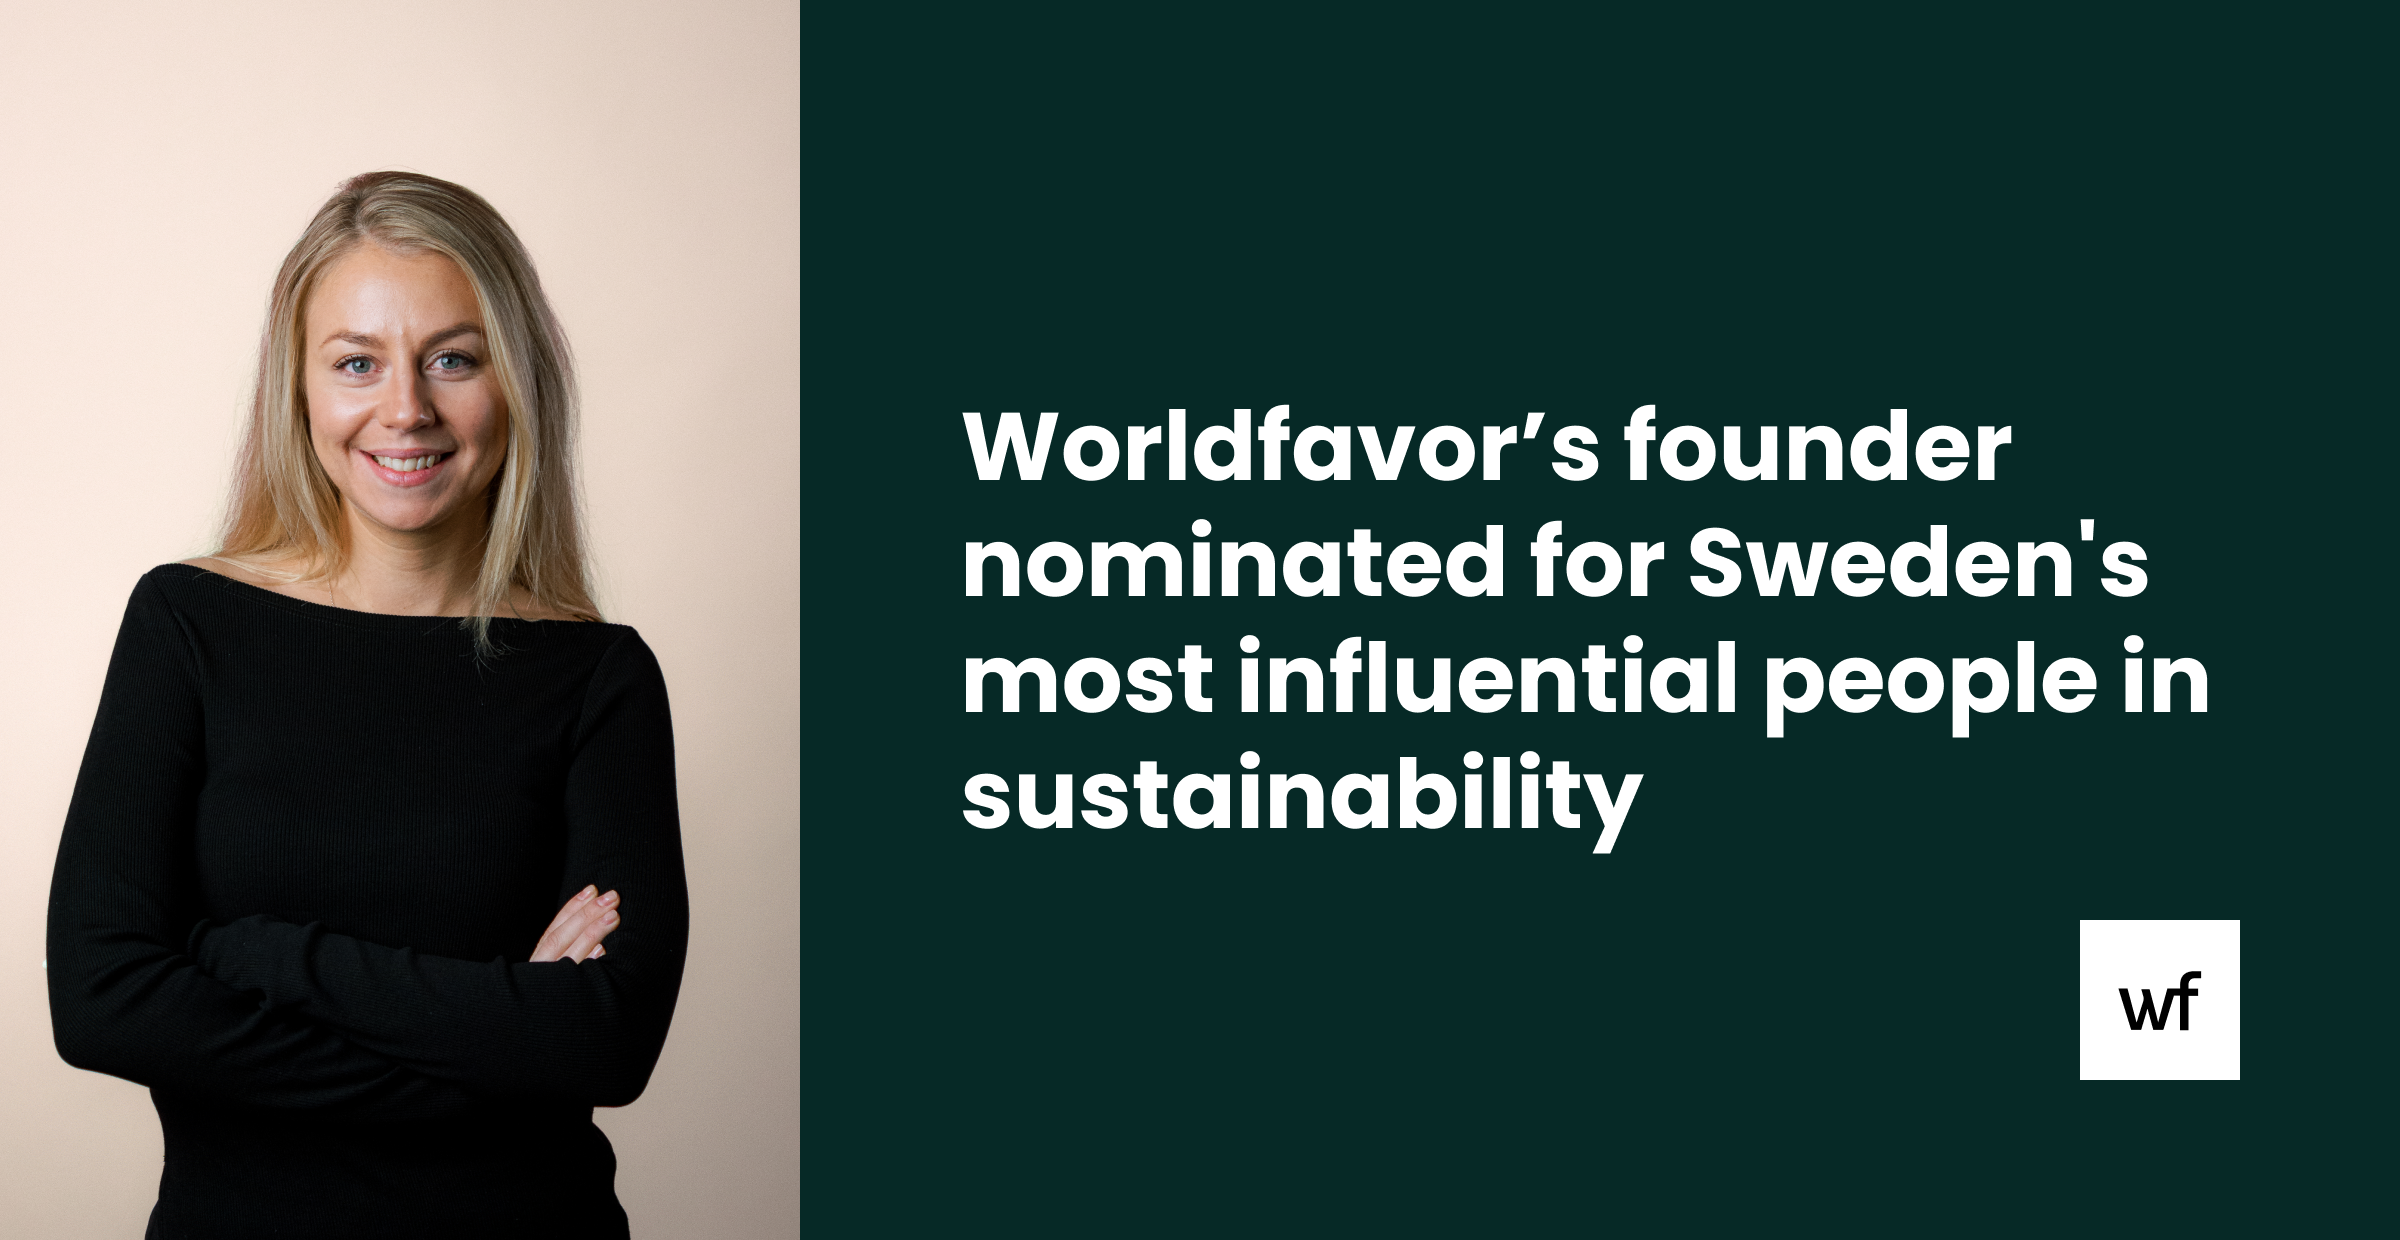 Frida Emilsson nominated for Sweden's most influential people in sustainability